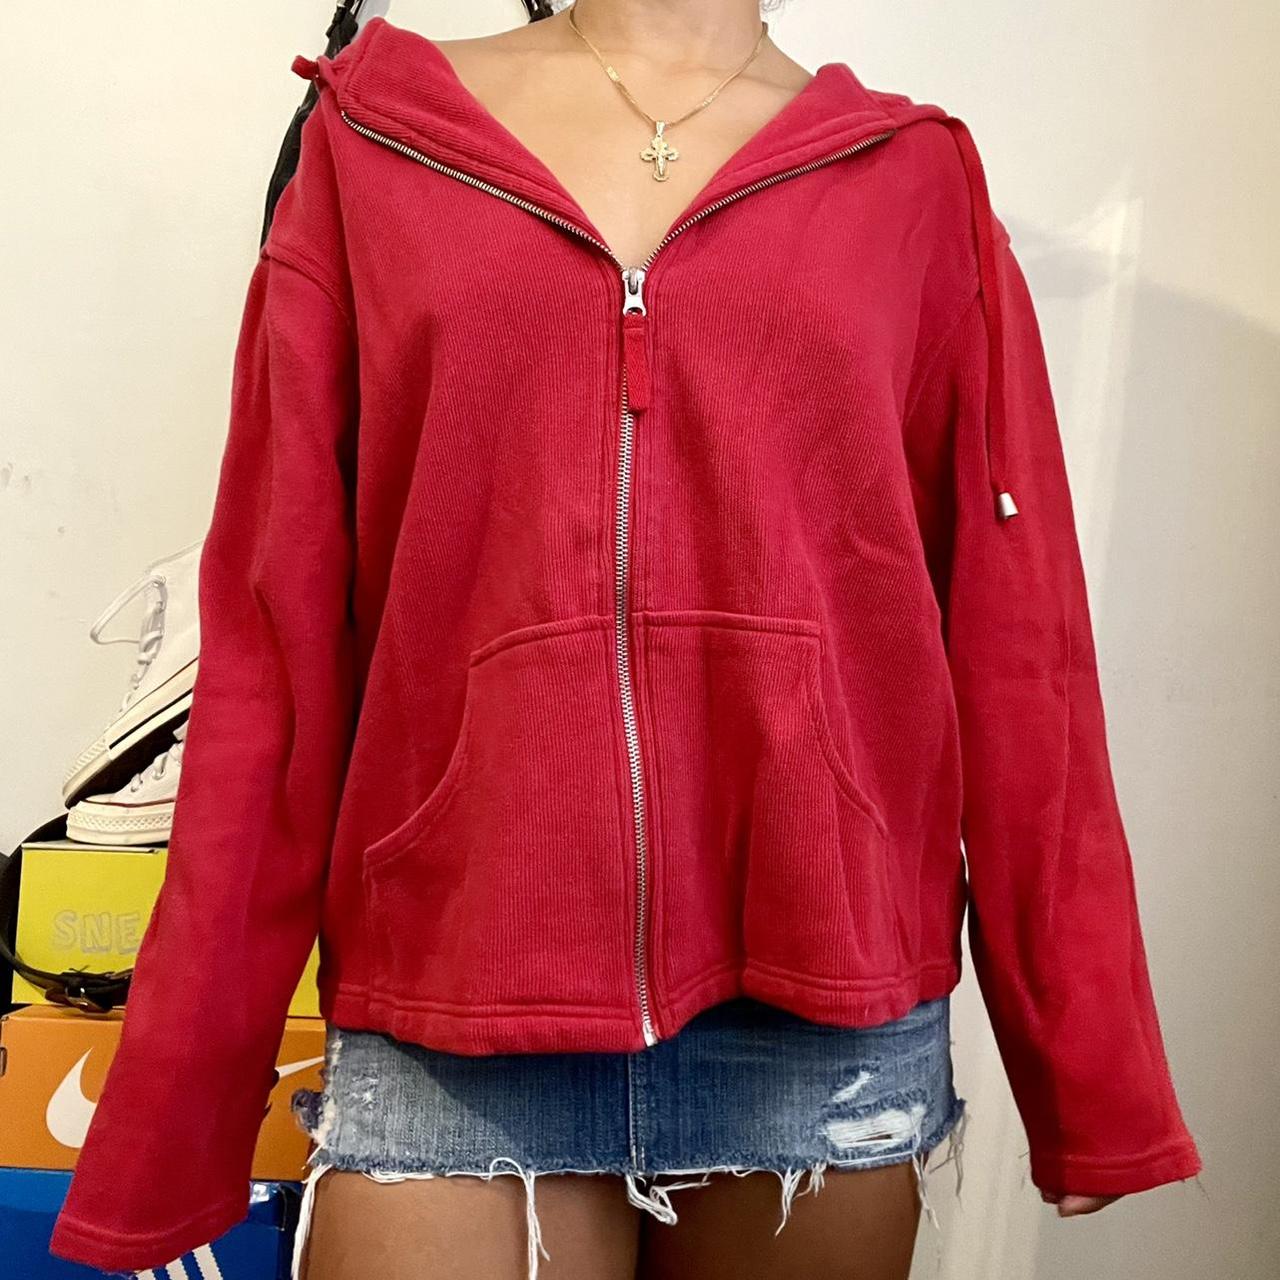 Basic Editions Women's Red Jacket